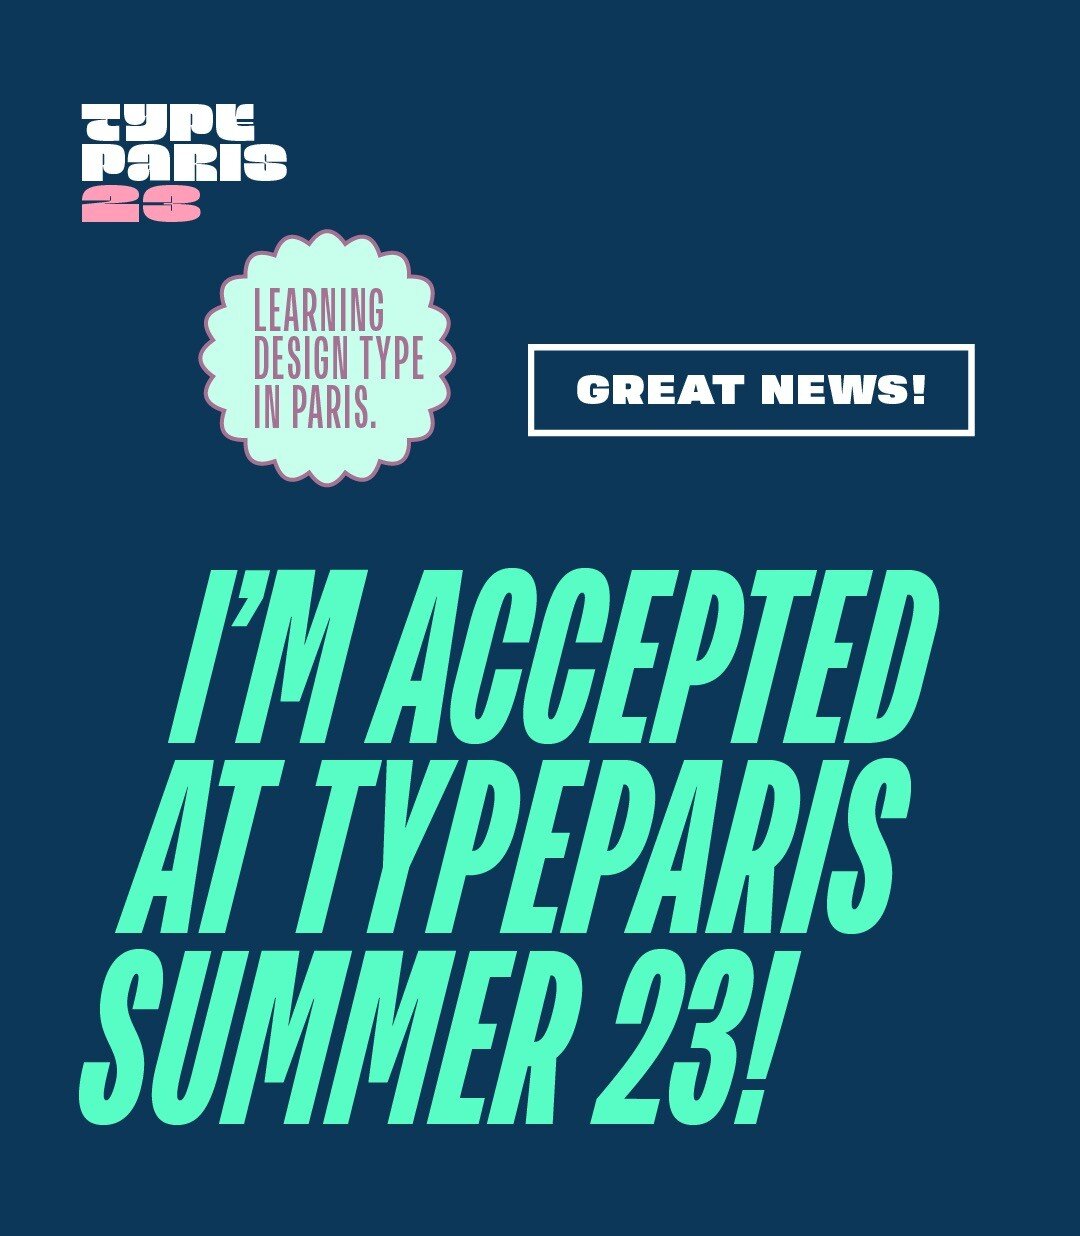 I'm back from my hiatus with a big update: I'm thrilled to announce that I have been accepted to @typeparis!
Excited to learn from the best in the industry and take my type-design skills to the next level. #typeparis23